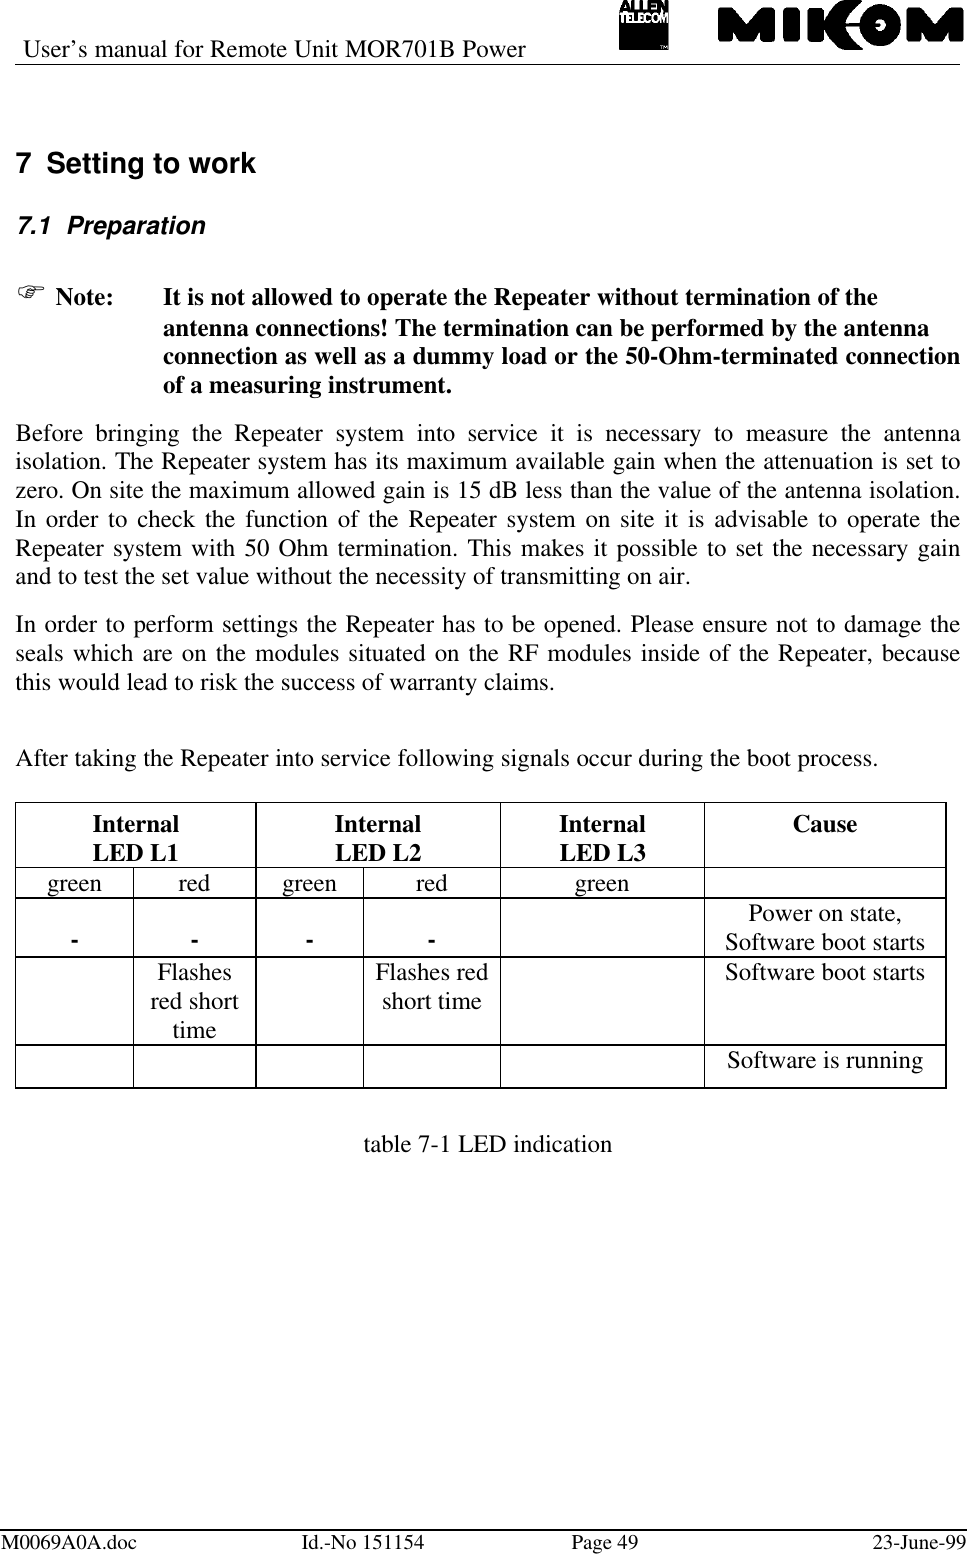 User’s manual for Remote Unit MOR701B PowerM0069A0A.doc Id.-No 151154 Page 49 23-June-997 Setting to work7.1 PreparationF Note: It is not allowed to operate the Repeater without termination of the antenna connections! The termination can be performed by the antenna connection as well as a dummy load or the 50-Ohm-terminated connectionof a measuring instrument.Before bringing the Repeater system into service it is necessary to measure the antennaisolation. The Repeater system has its maximum available gain when the attenuation is set tozero. On site the maximum allowed gain is 15 dB less than the value of the antenna isolation.In order to check the function of the Repeater system on site it is advisable to operate theRepeater system with 50 Ohm termination. This makes it possible to set the necessary gainand to test the set value without the necessity of transmitting on air.In order to perform settings the Repeater has to be opened. Please ensure not to damage theseals which are on the modules situated on the RF modules inside of the Repeater, becausethis would lead to risk the success of warranty claims.After taking the Repeater into service following signals occur during the boot process.InternalLED L1 InternalLED L2 InternalLED L3 Causegreen red green red green- - - - ll Power on state,Software boot startsll Flashesred shorttimell Flashes redshort time ll Software boot startsll ll ll Software is runningtable 7-1 LED indication